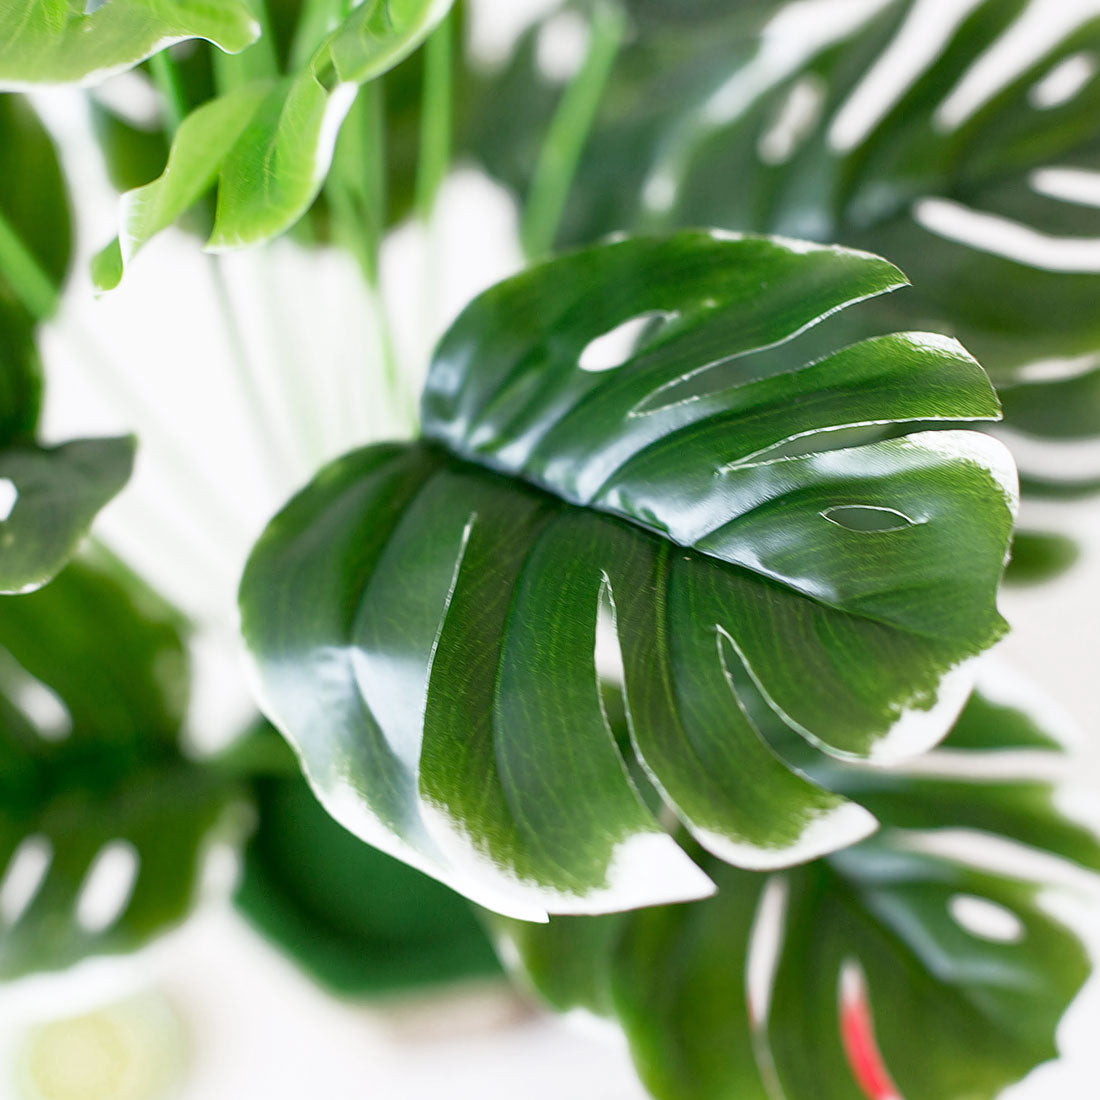 Artificial leaves branches for home